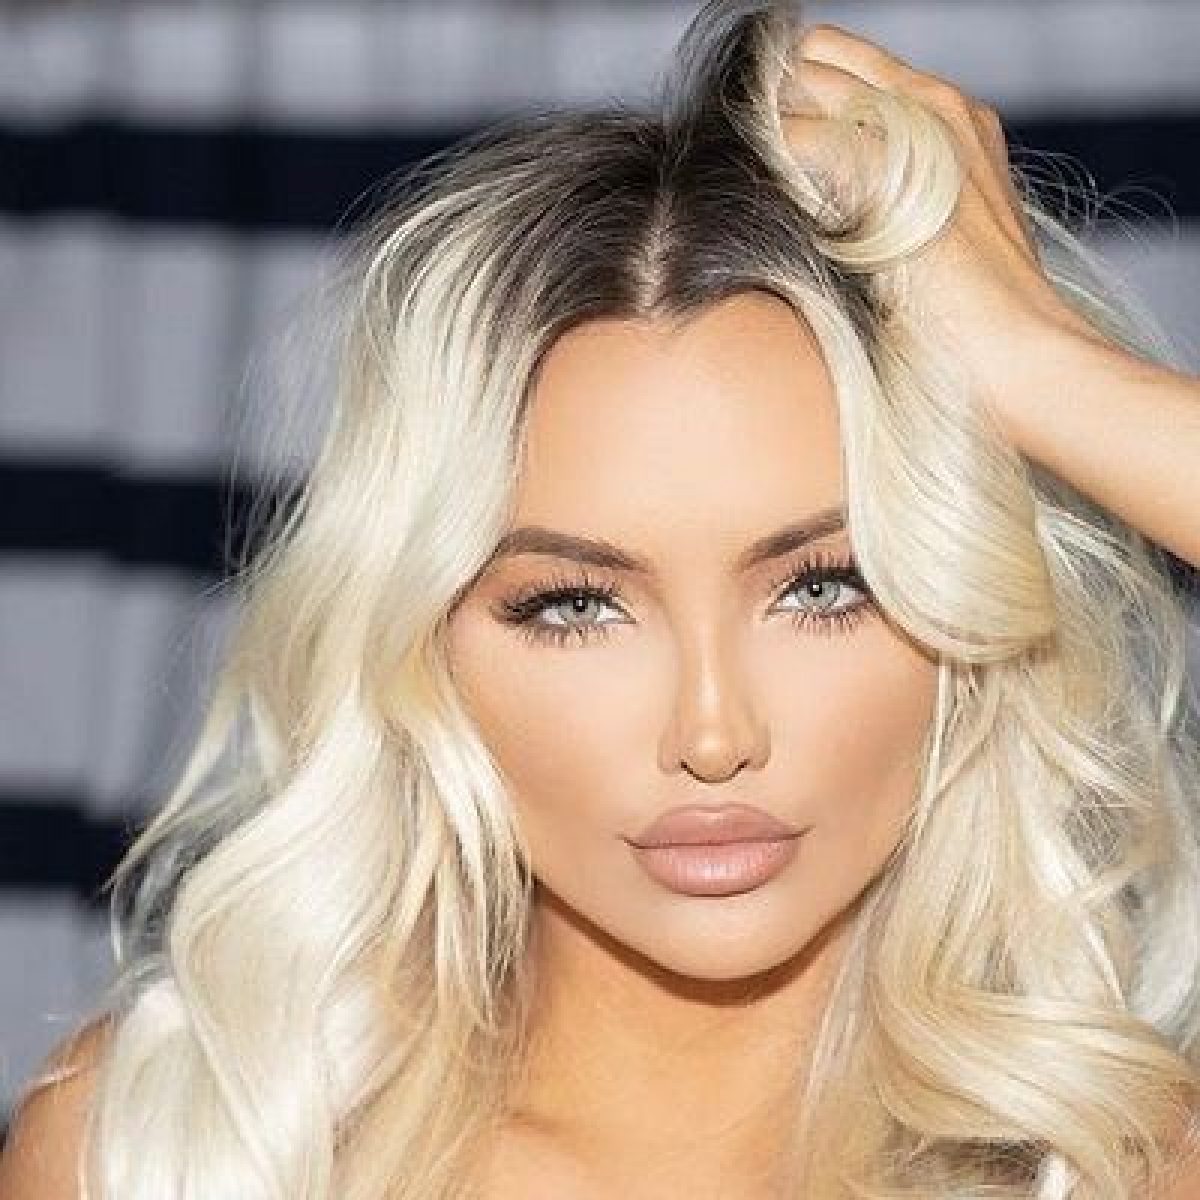 Lindsey pelas pictures